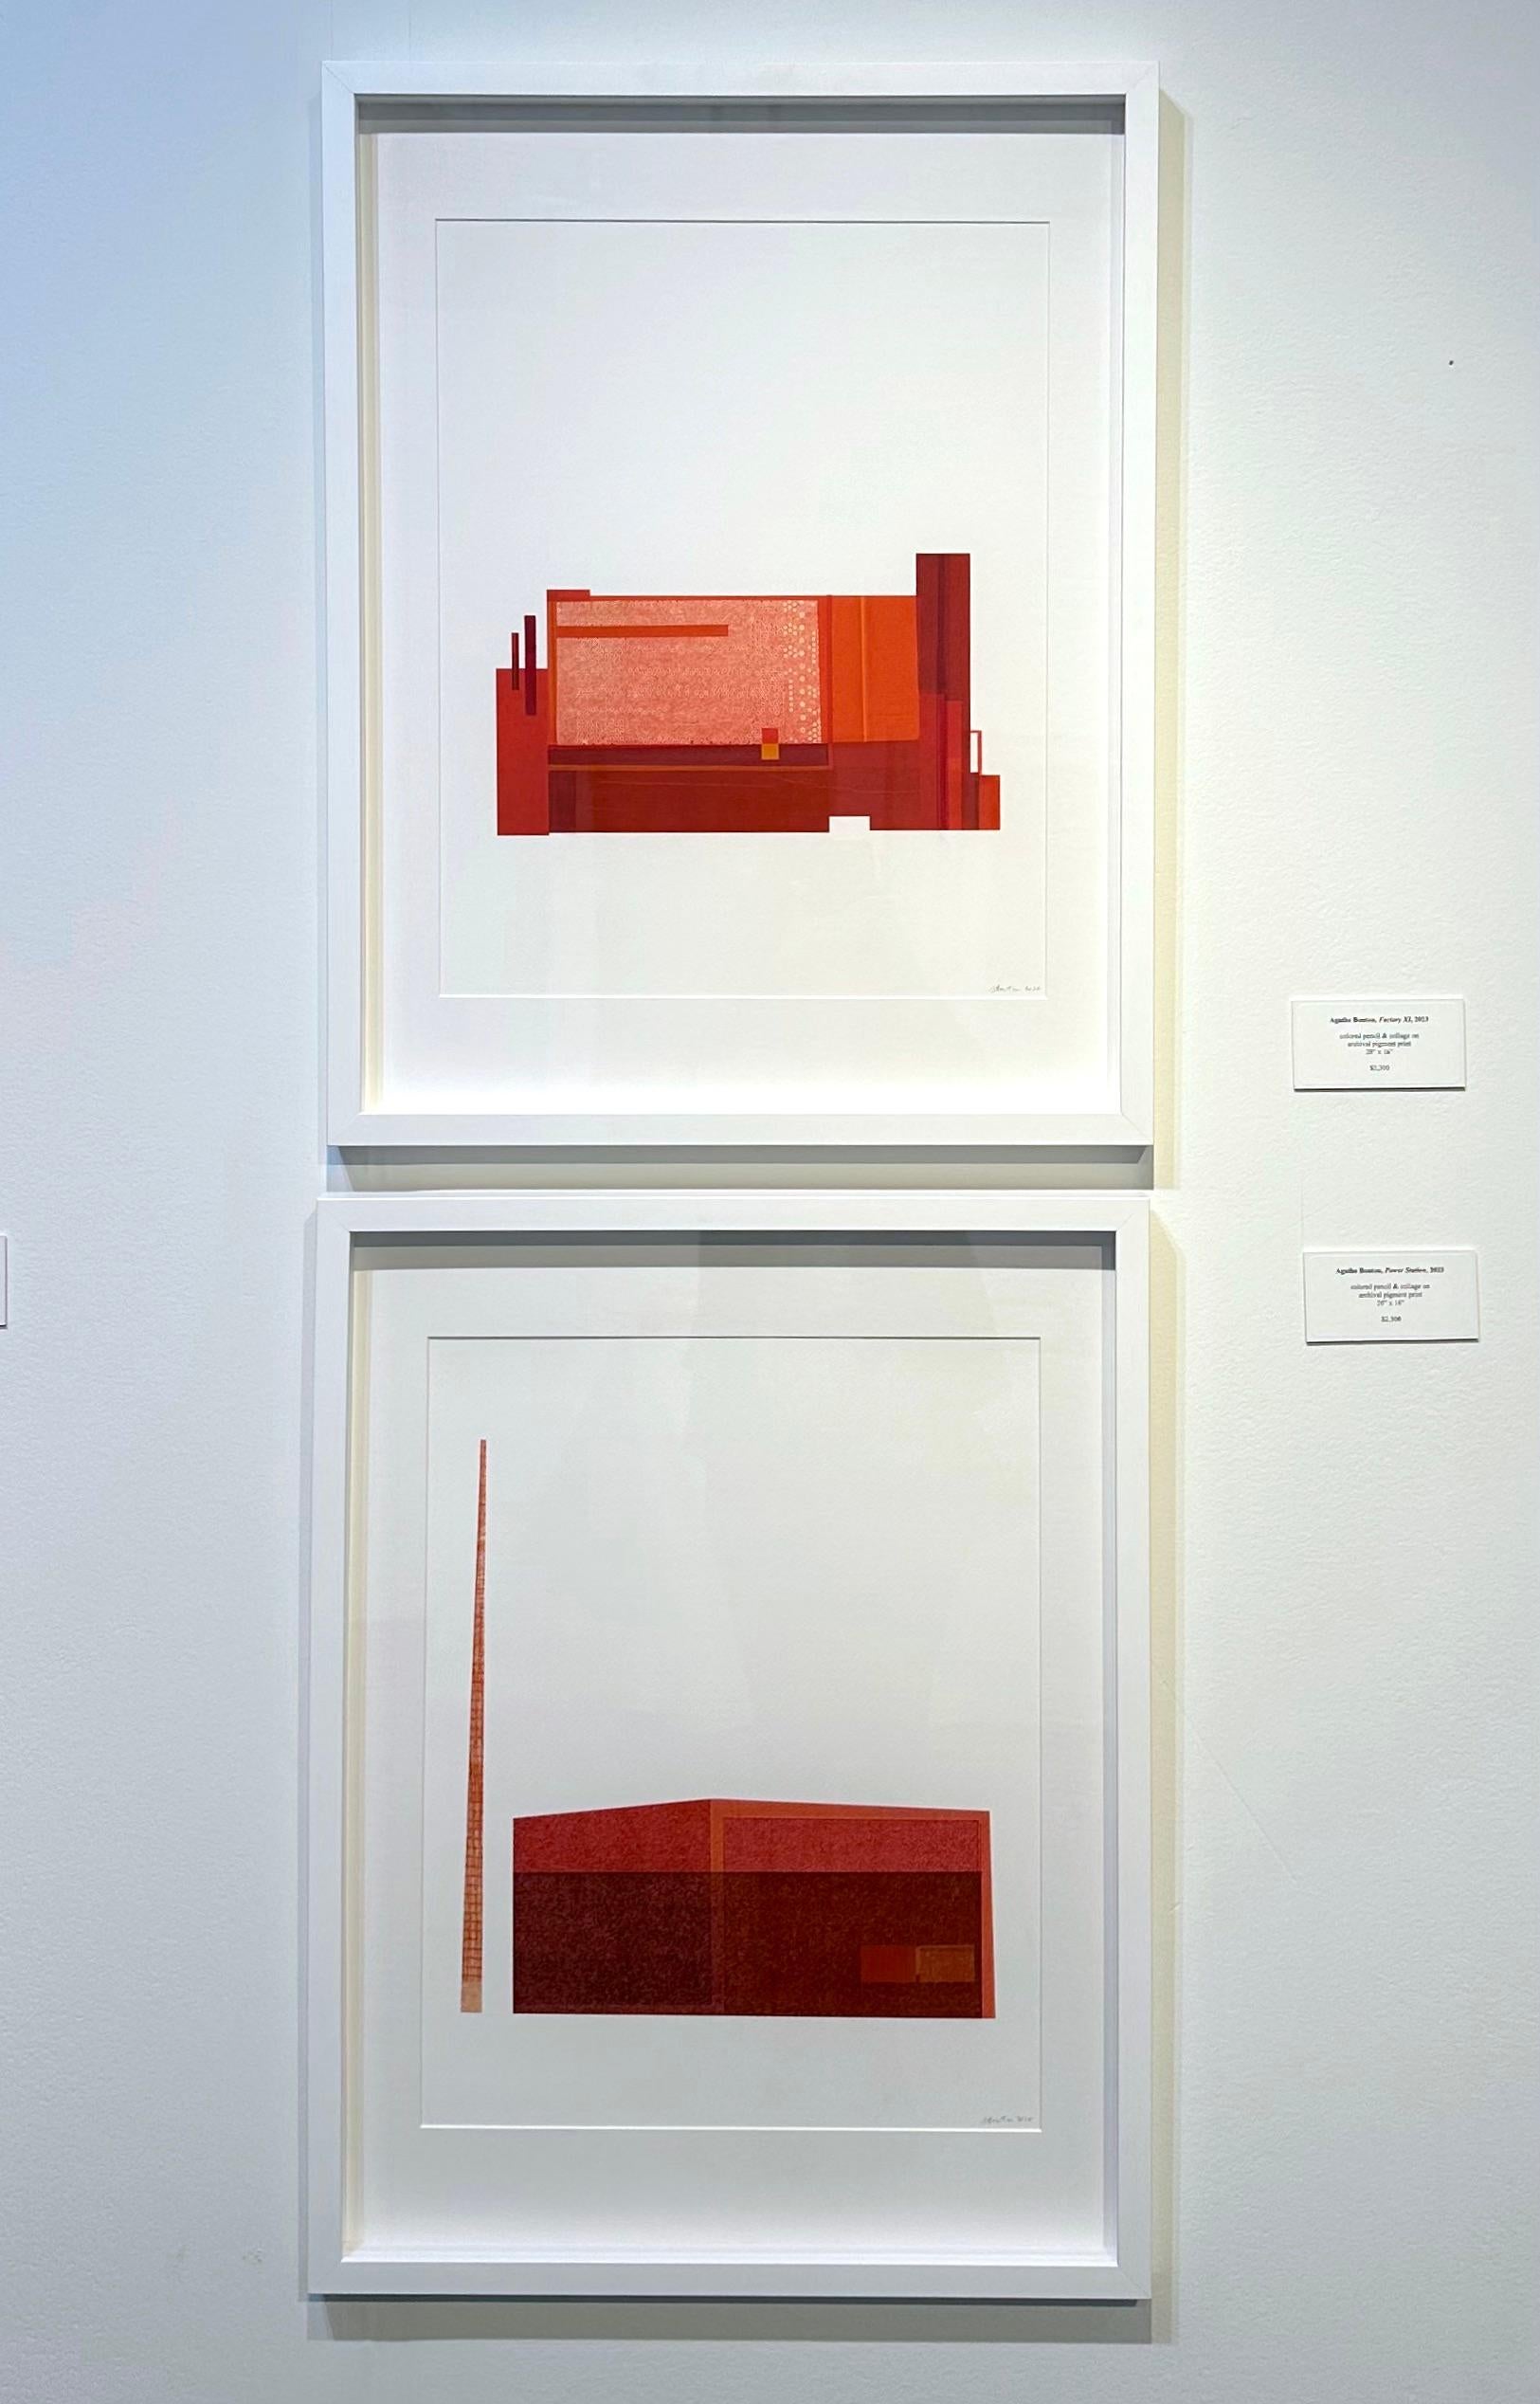 Factory XII: modernist urban architectural collage on monoprint in red, unframed - Contemporary Print by Agathe Bouton